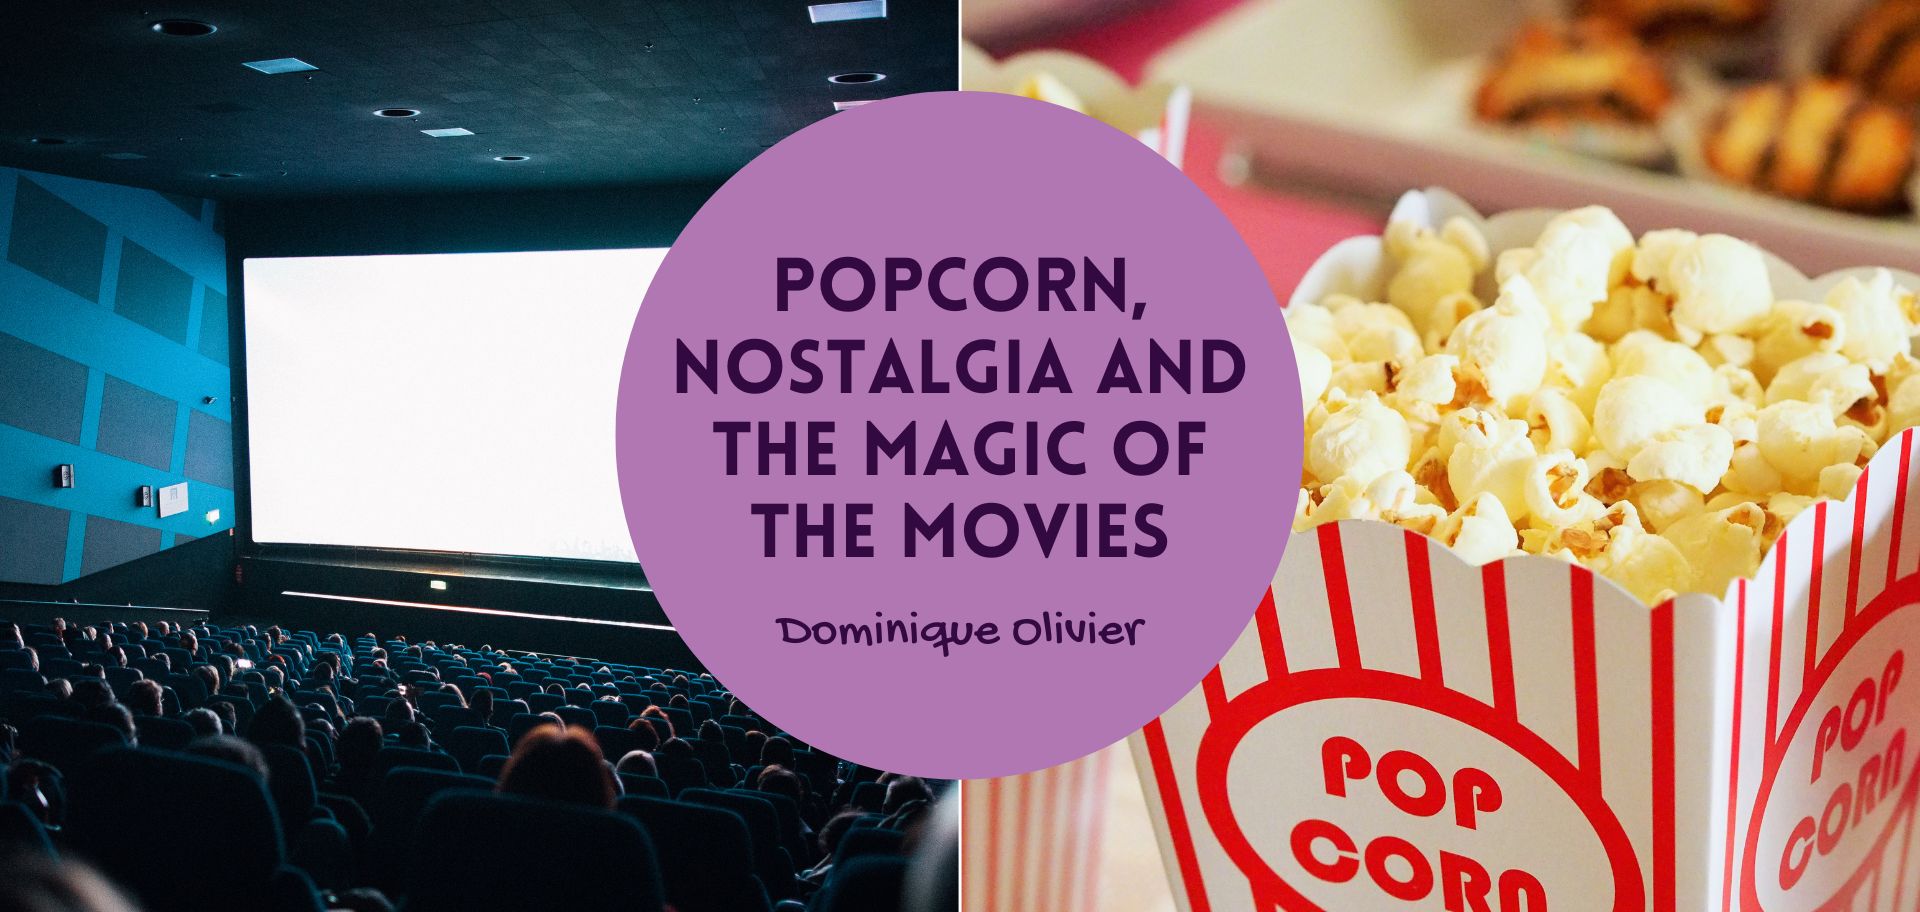 Popcorn, nostalgia and the magic of the movies